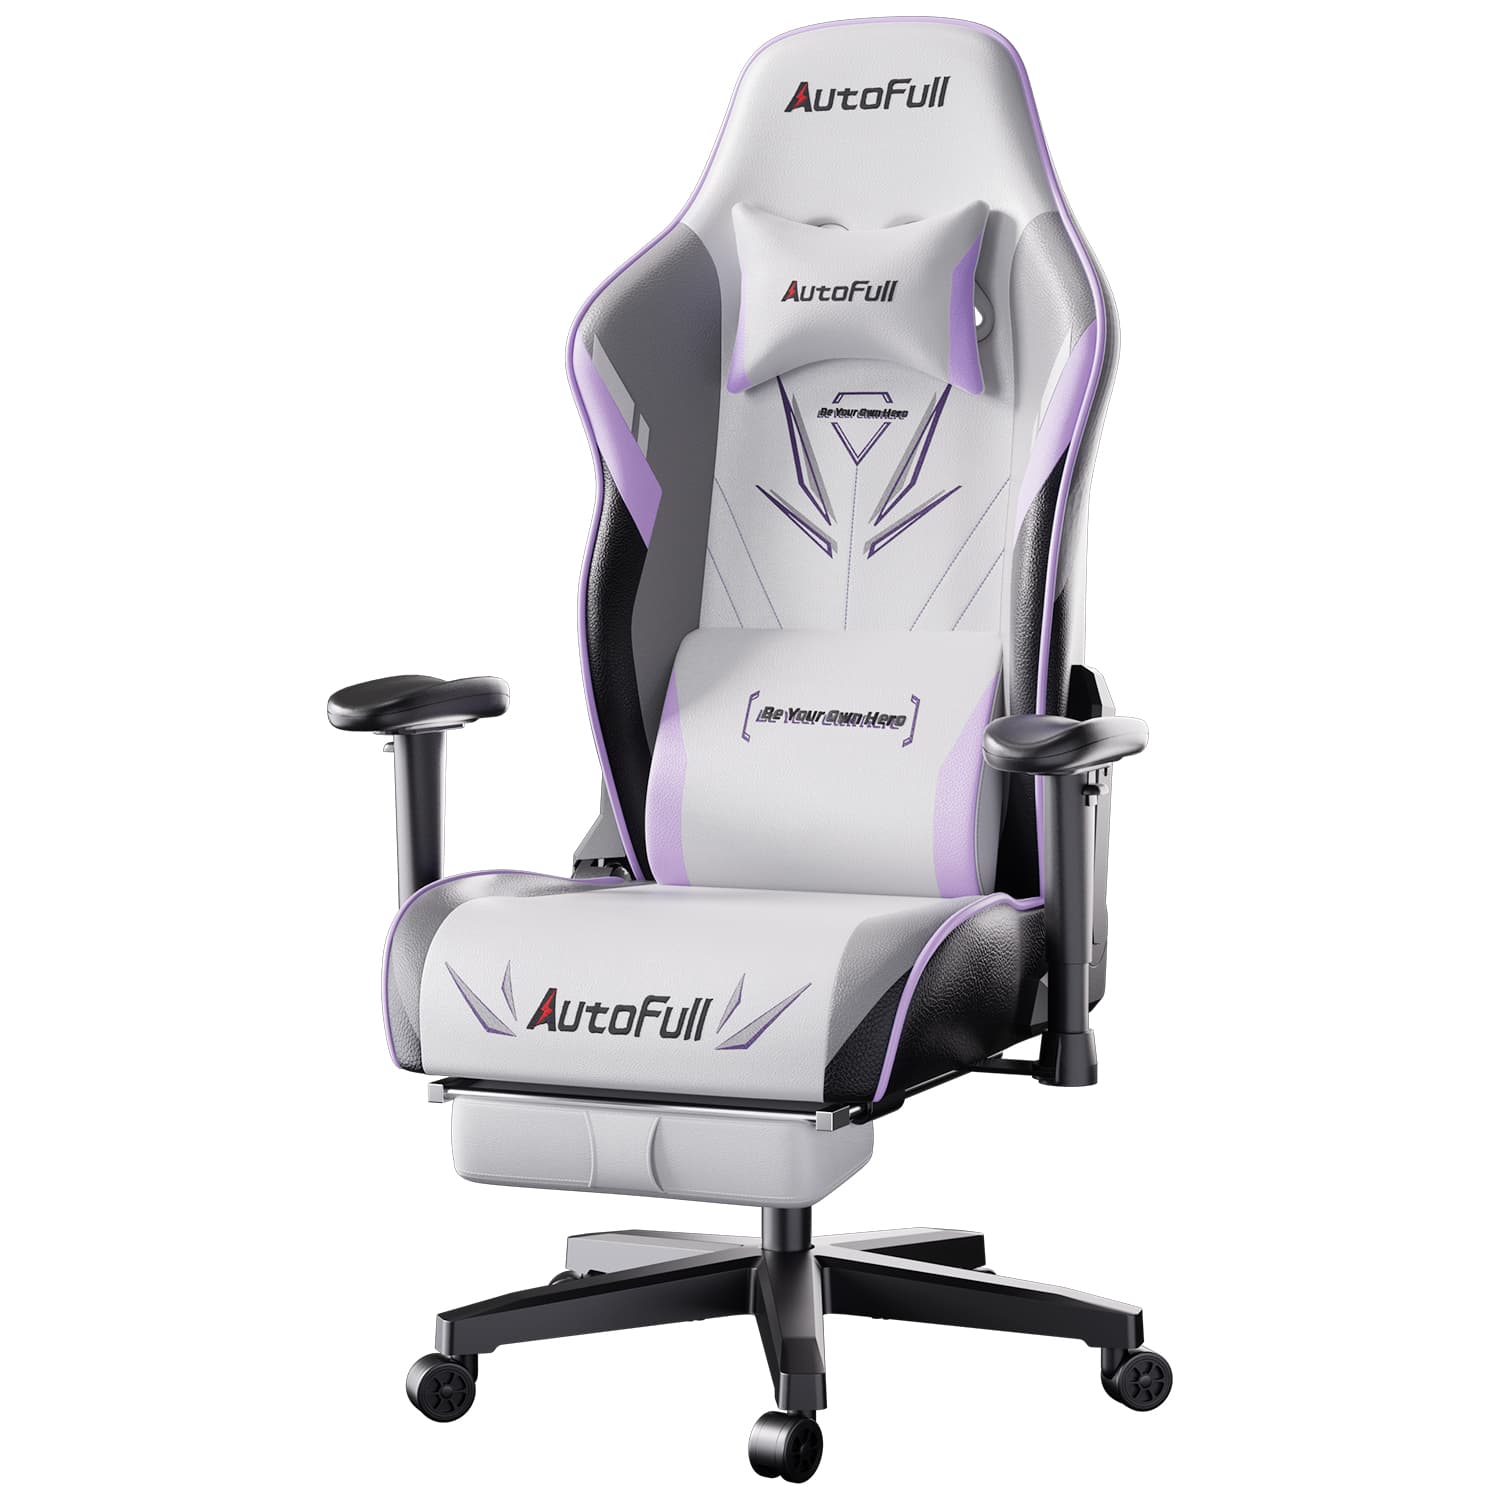 AutoFull C3 Gaming Chair, Whirlwind, White Color